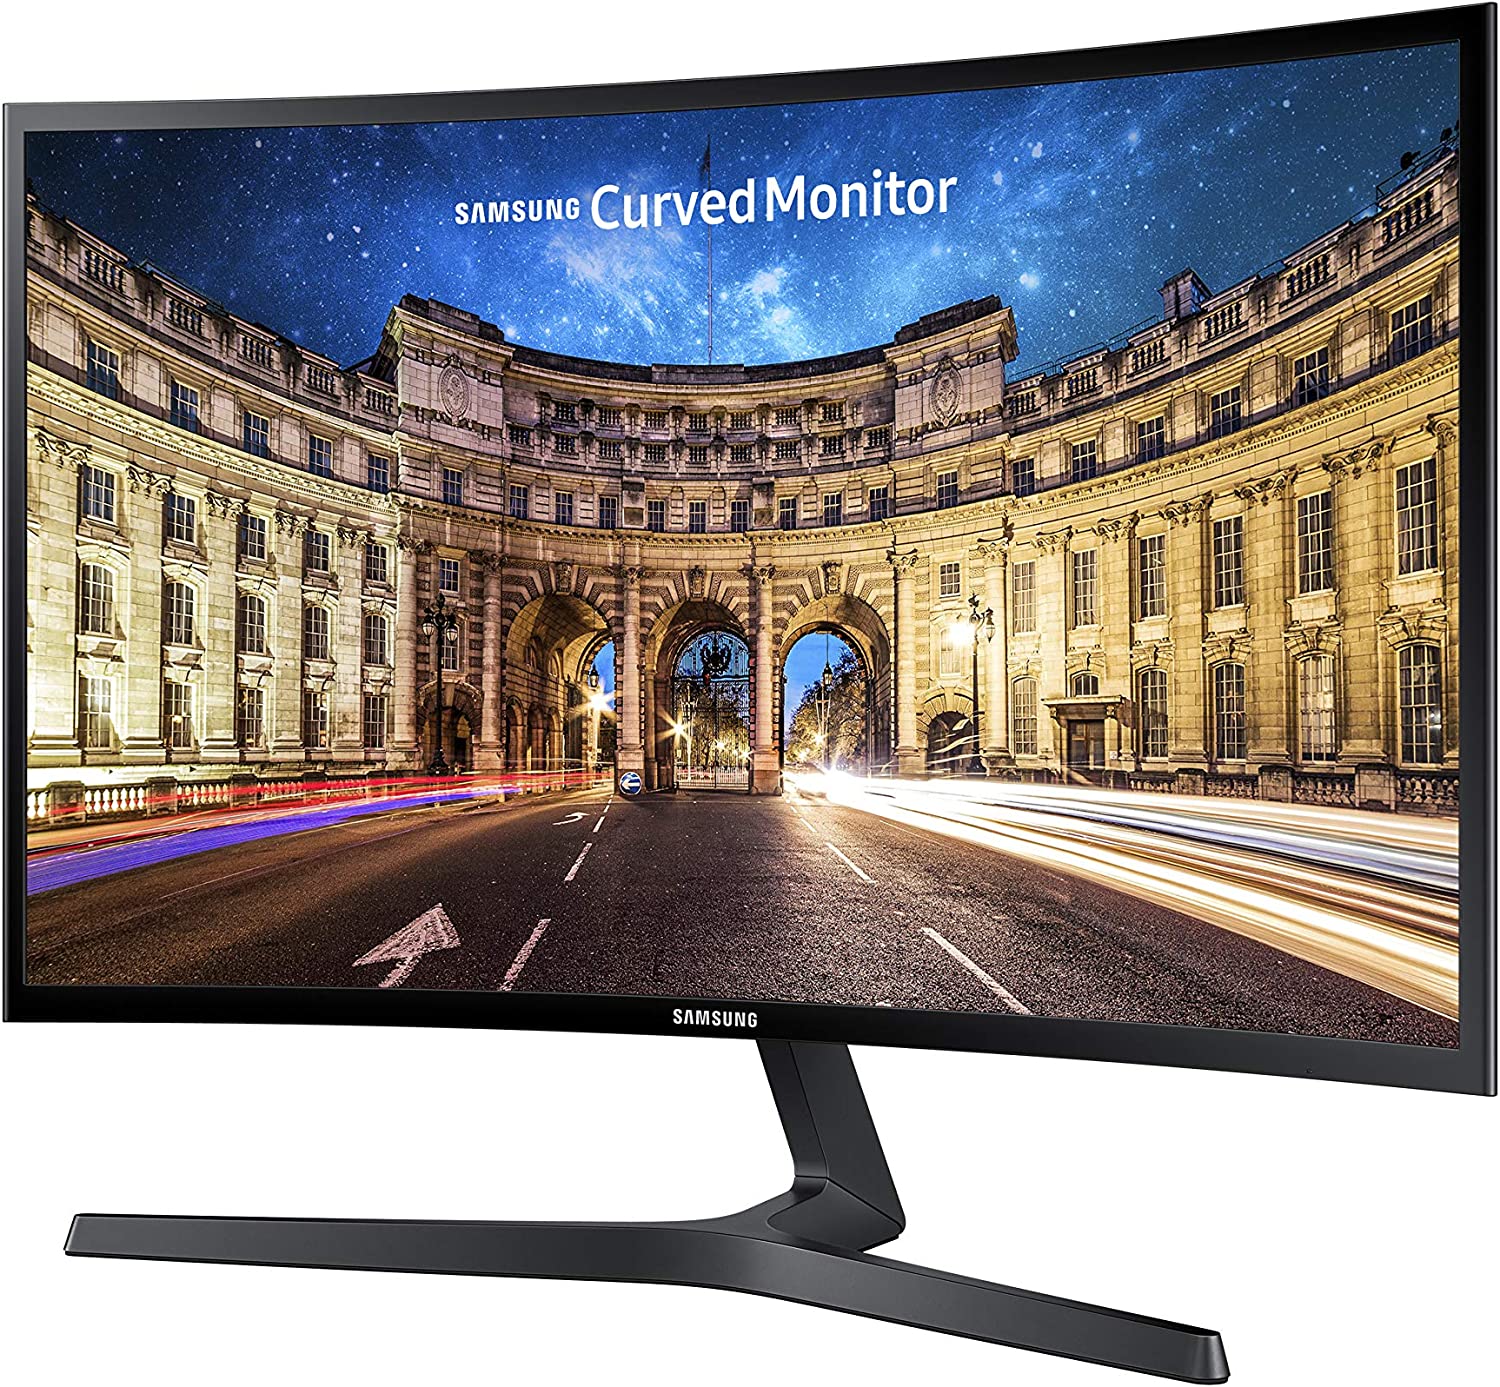 viewing angle for computer monitor review